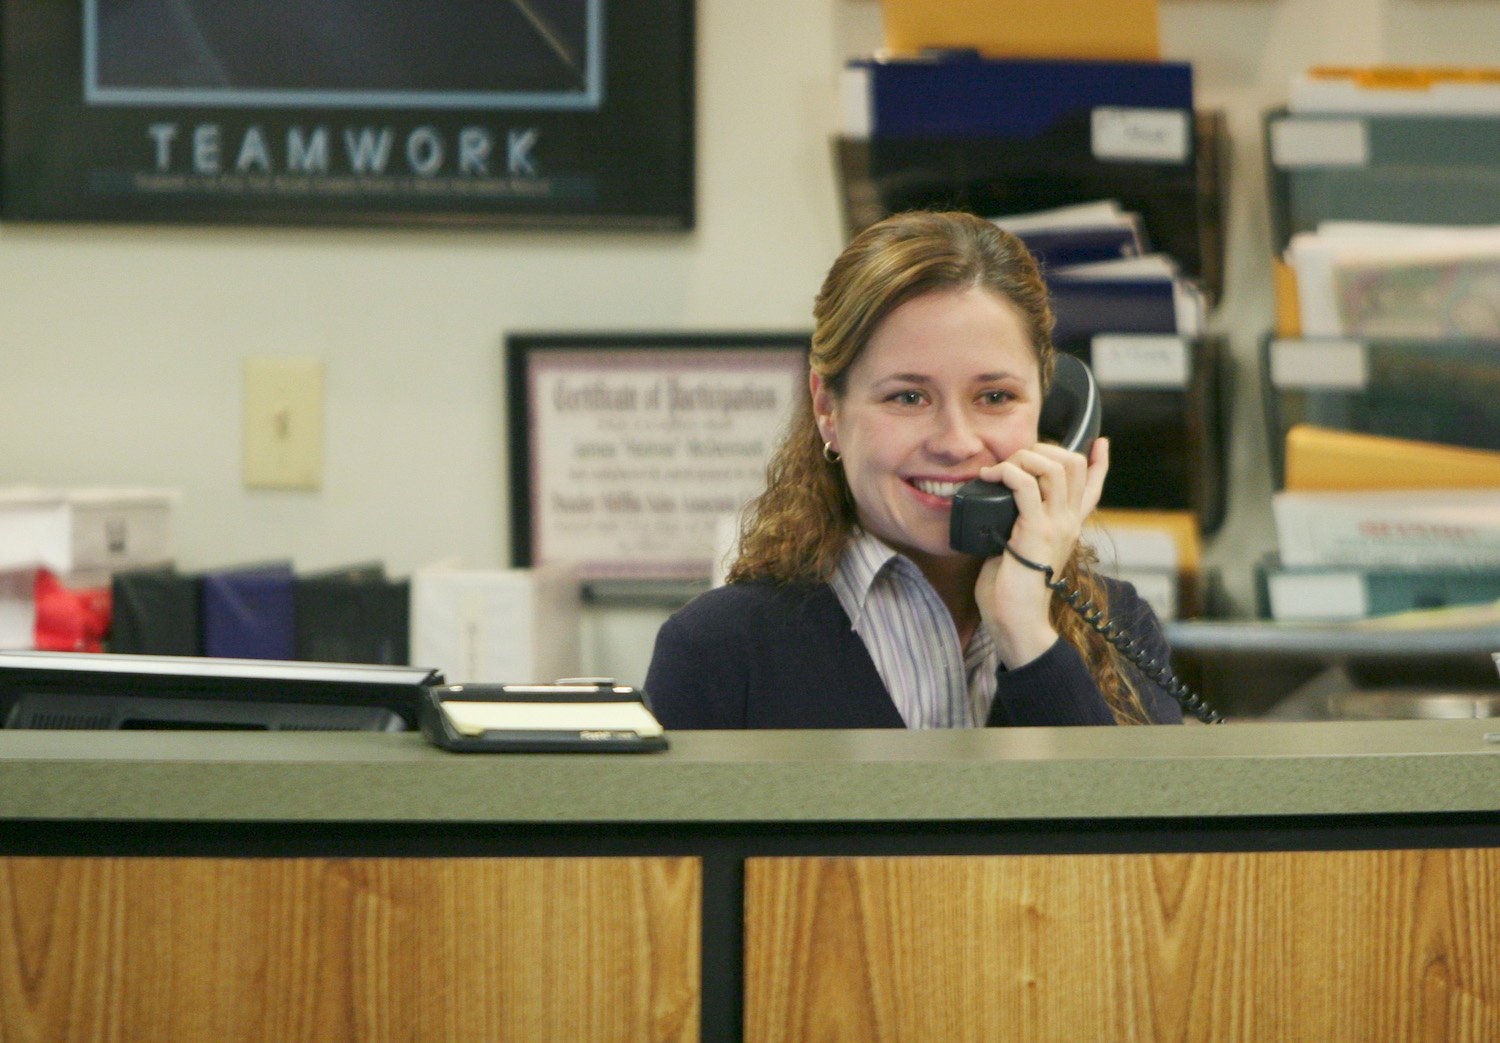 The Office star Jenna Fischer as her character Pam, smiling at the reception desk at Dunder Mifflin